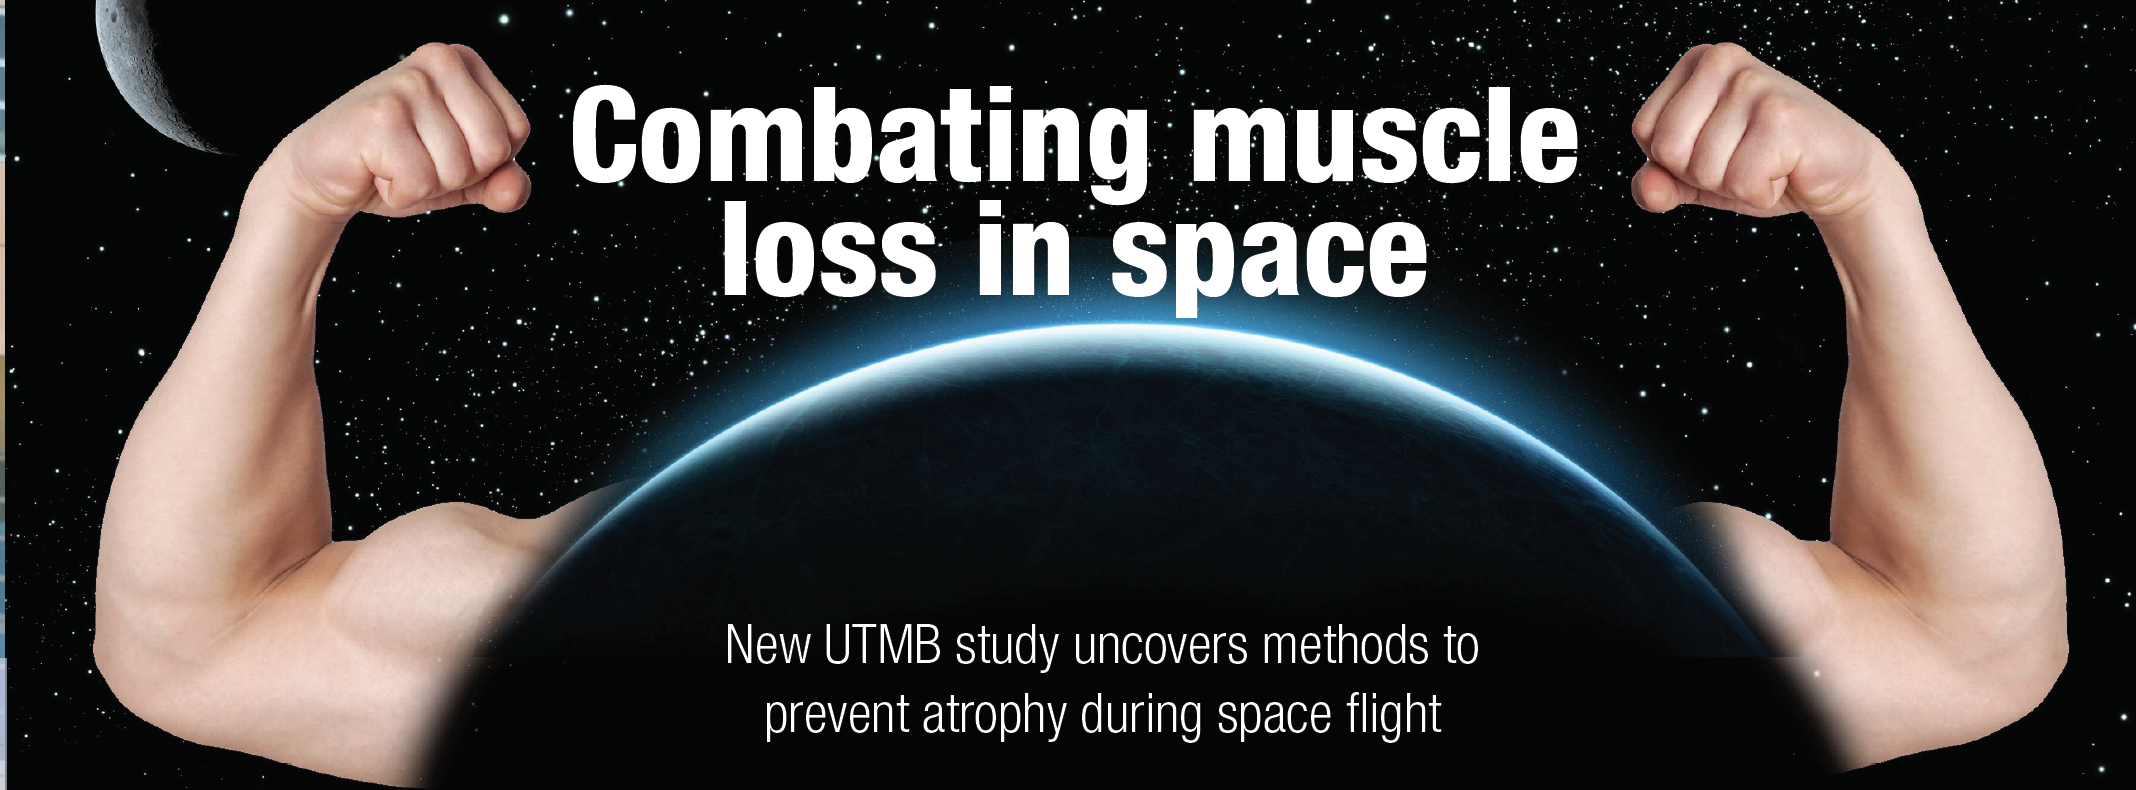 image for muscle loss in space story 